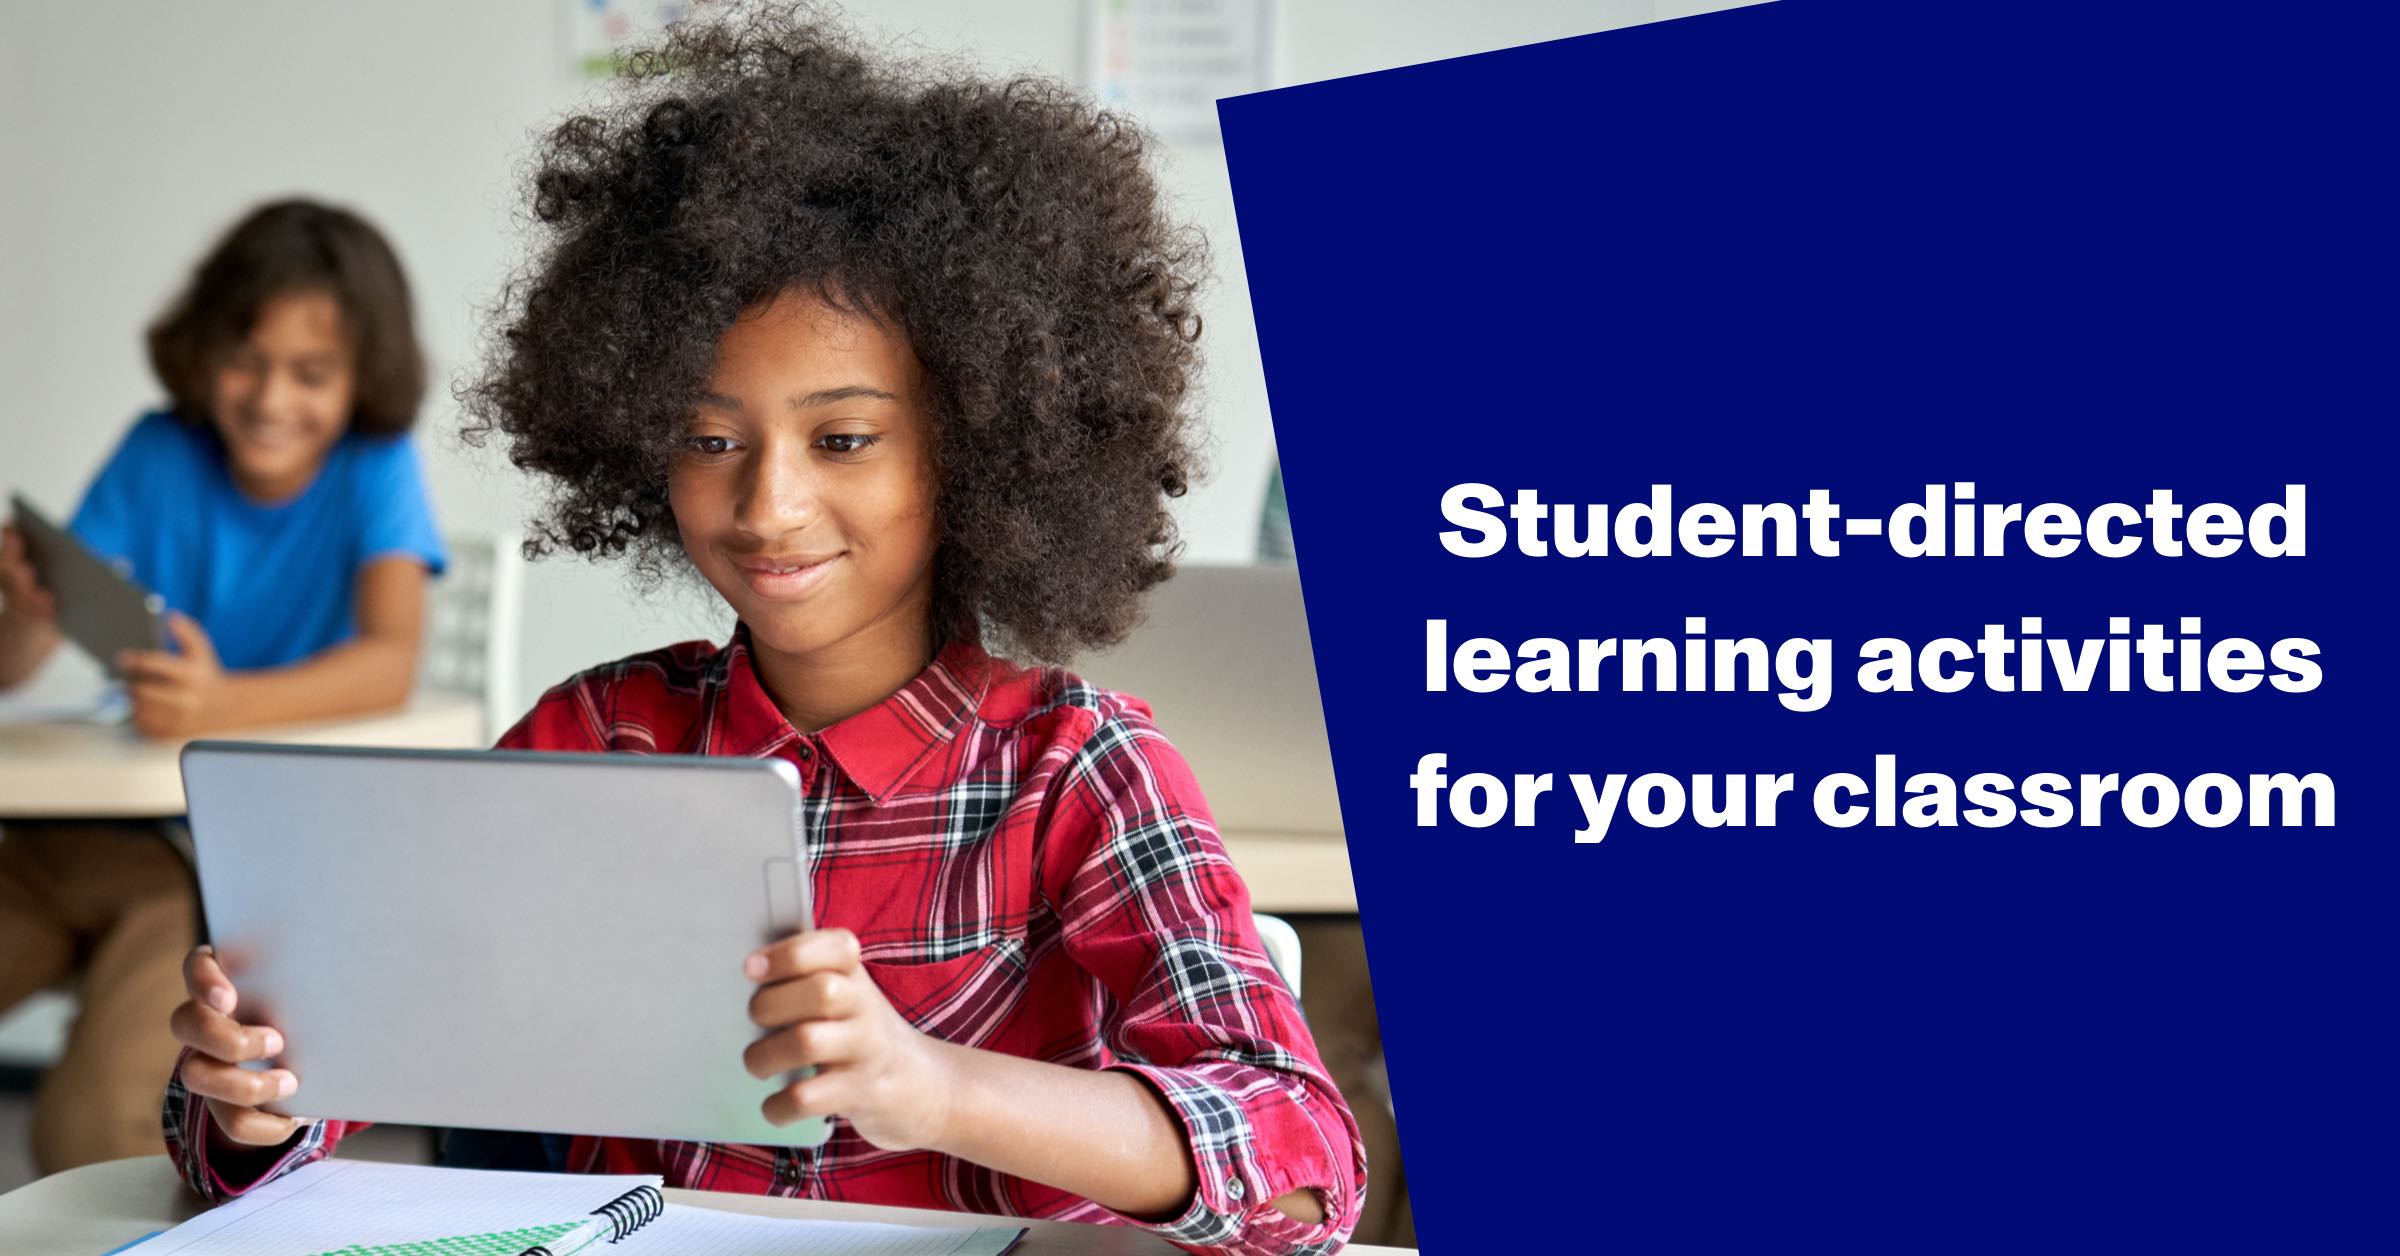 Student-directed learning activities for your classroom